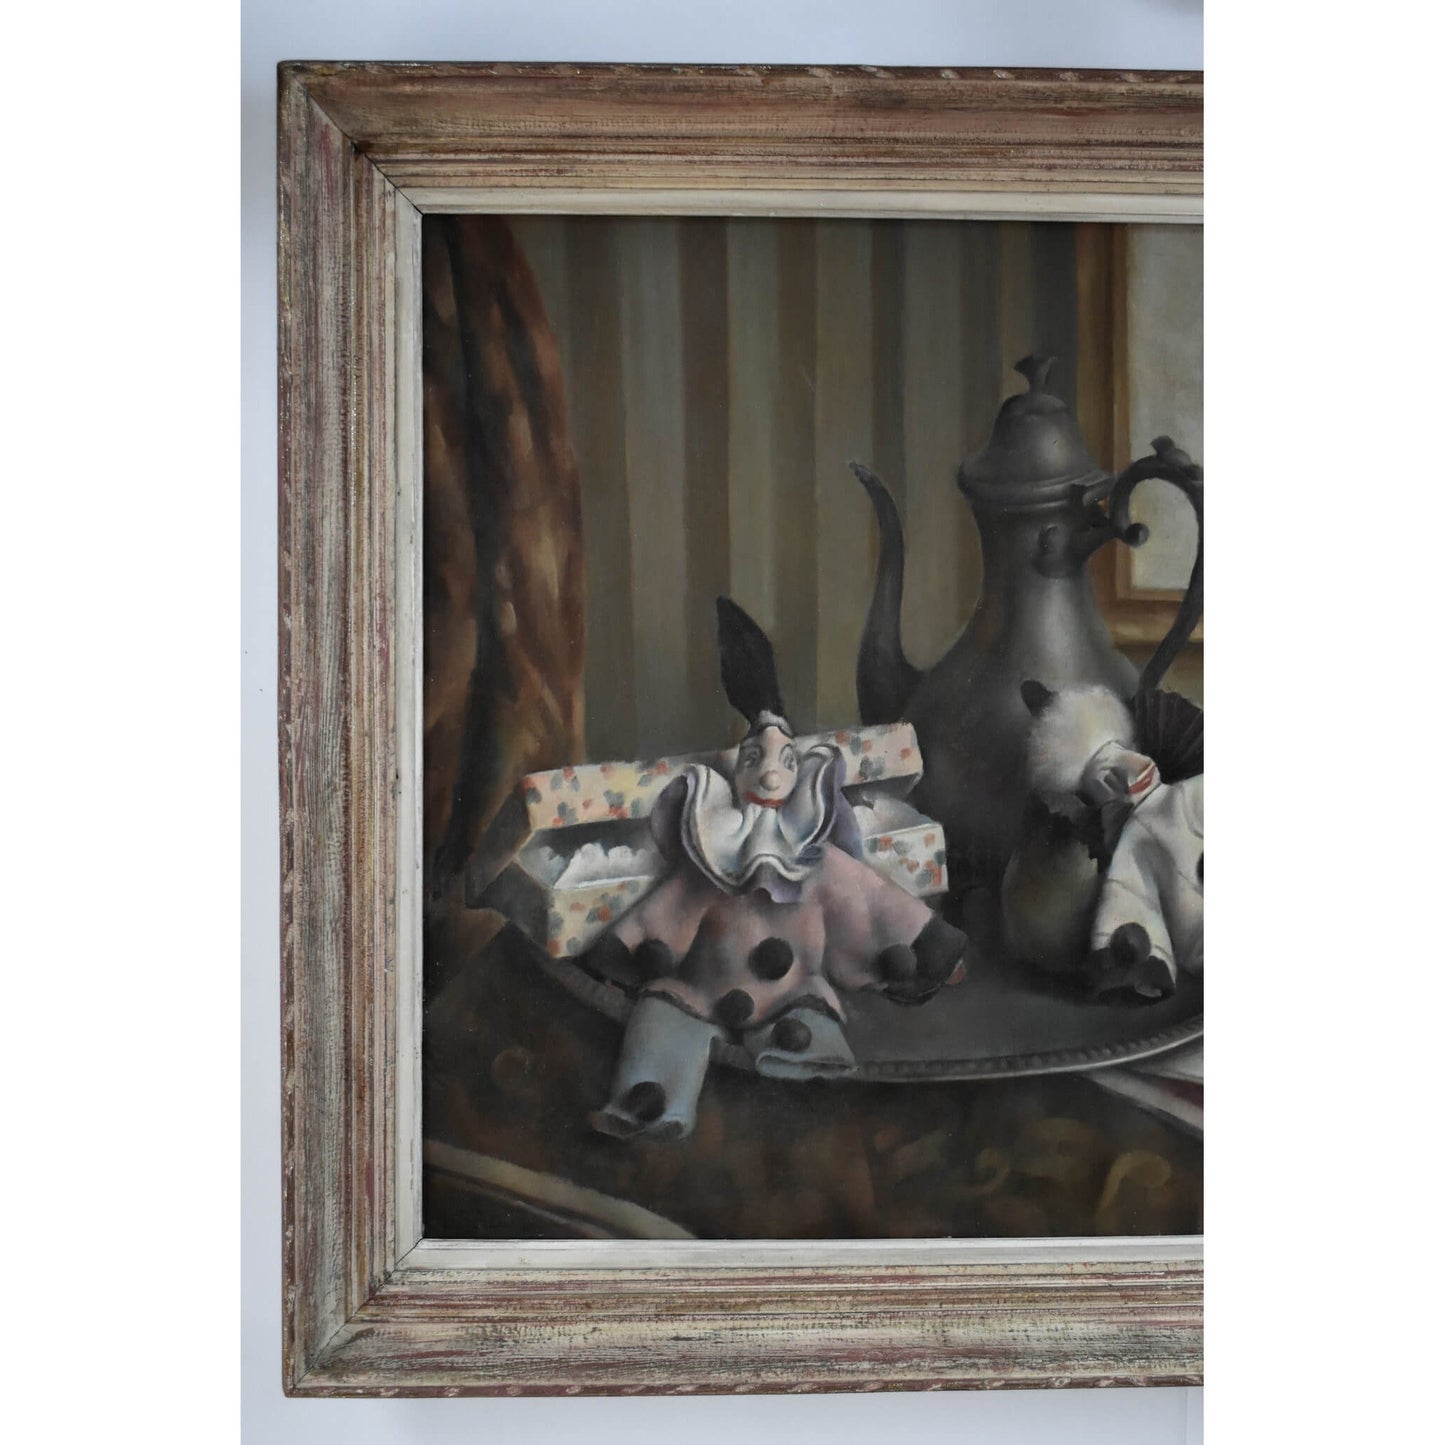 Still life oil painting with marionettes Art Deco style circa 1925 by Albert Brabo for sale at Winckelmann Gallery